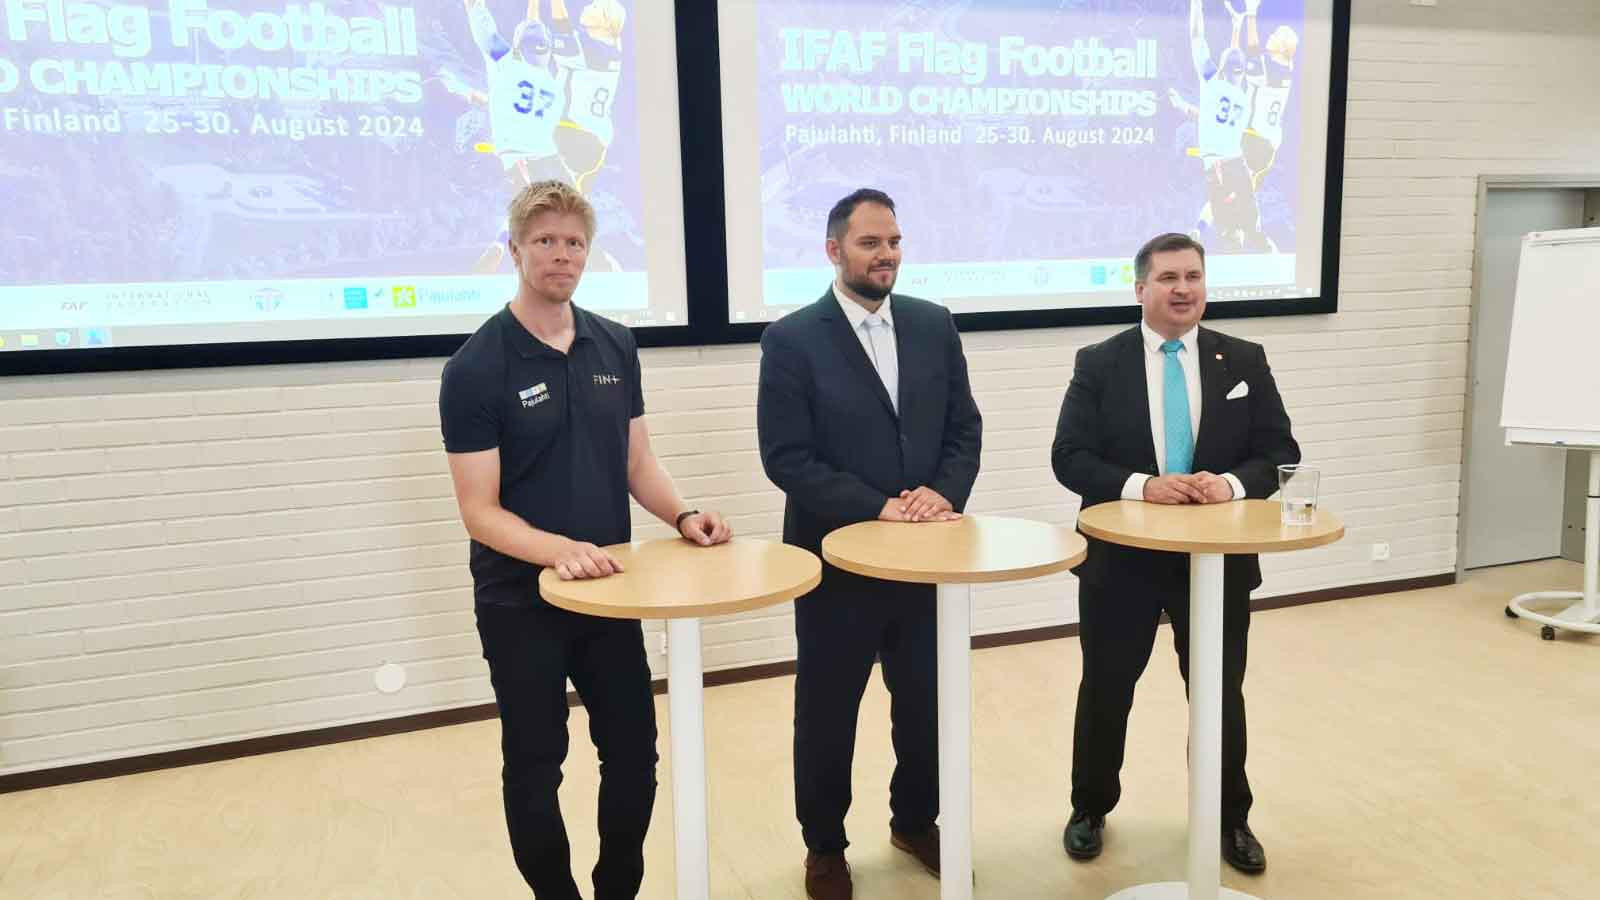 IFAF and SAJL announced the 2024 Flag Football World Championship would take place in Lahti ©Getty Images